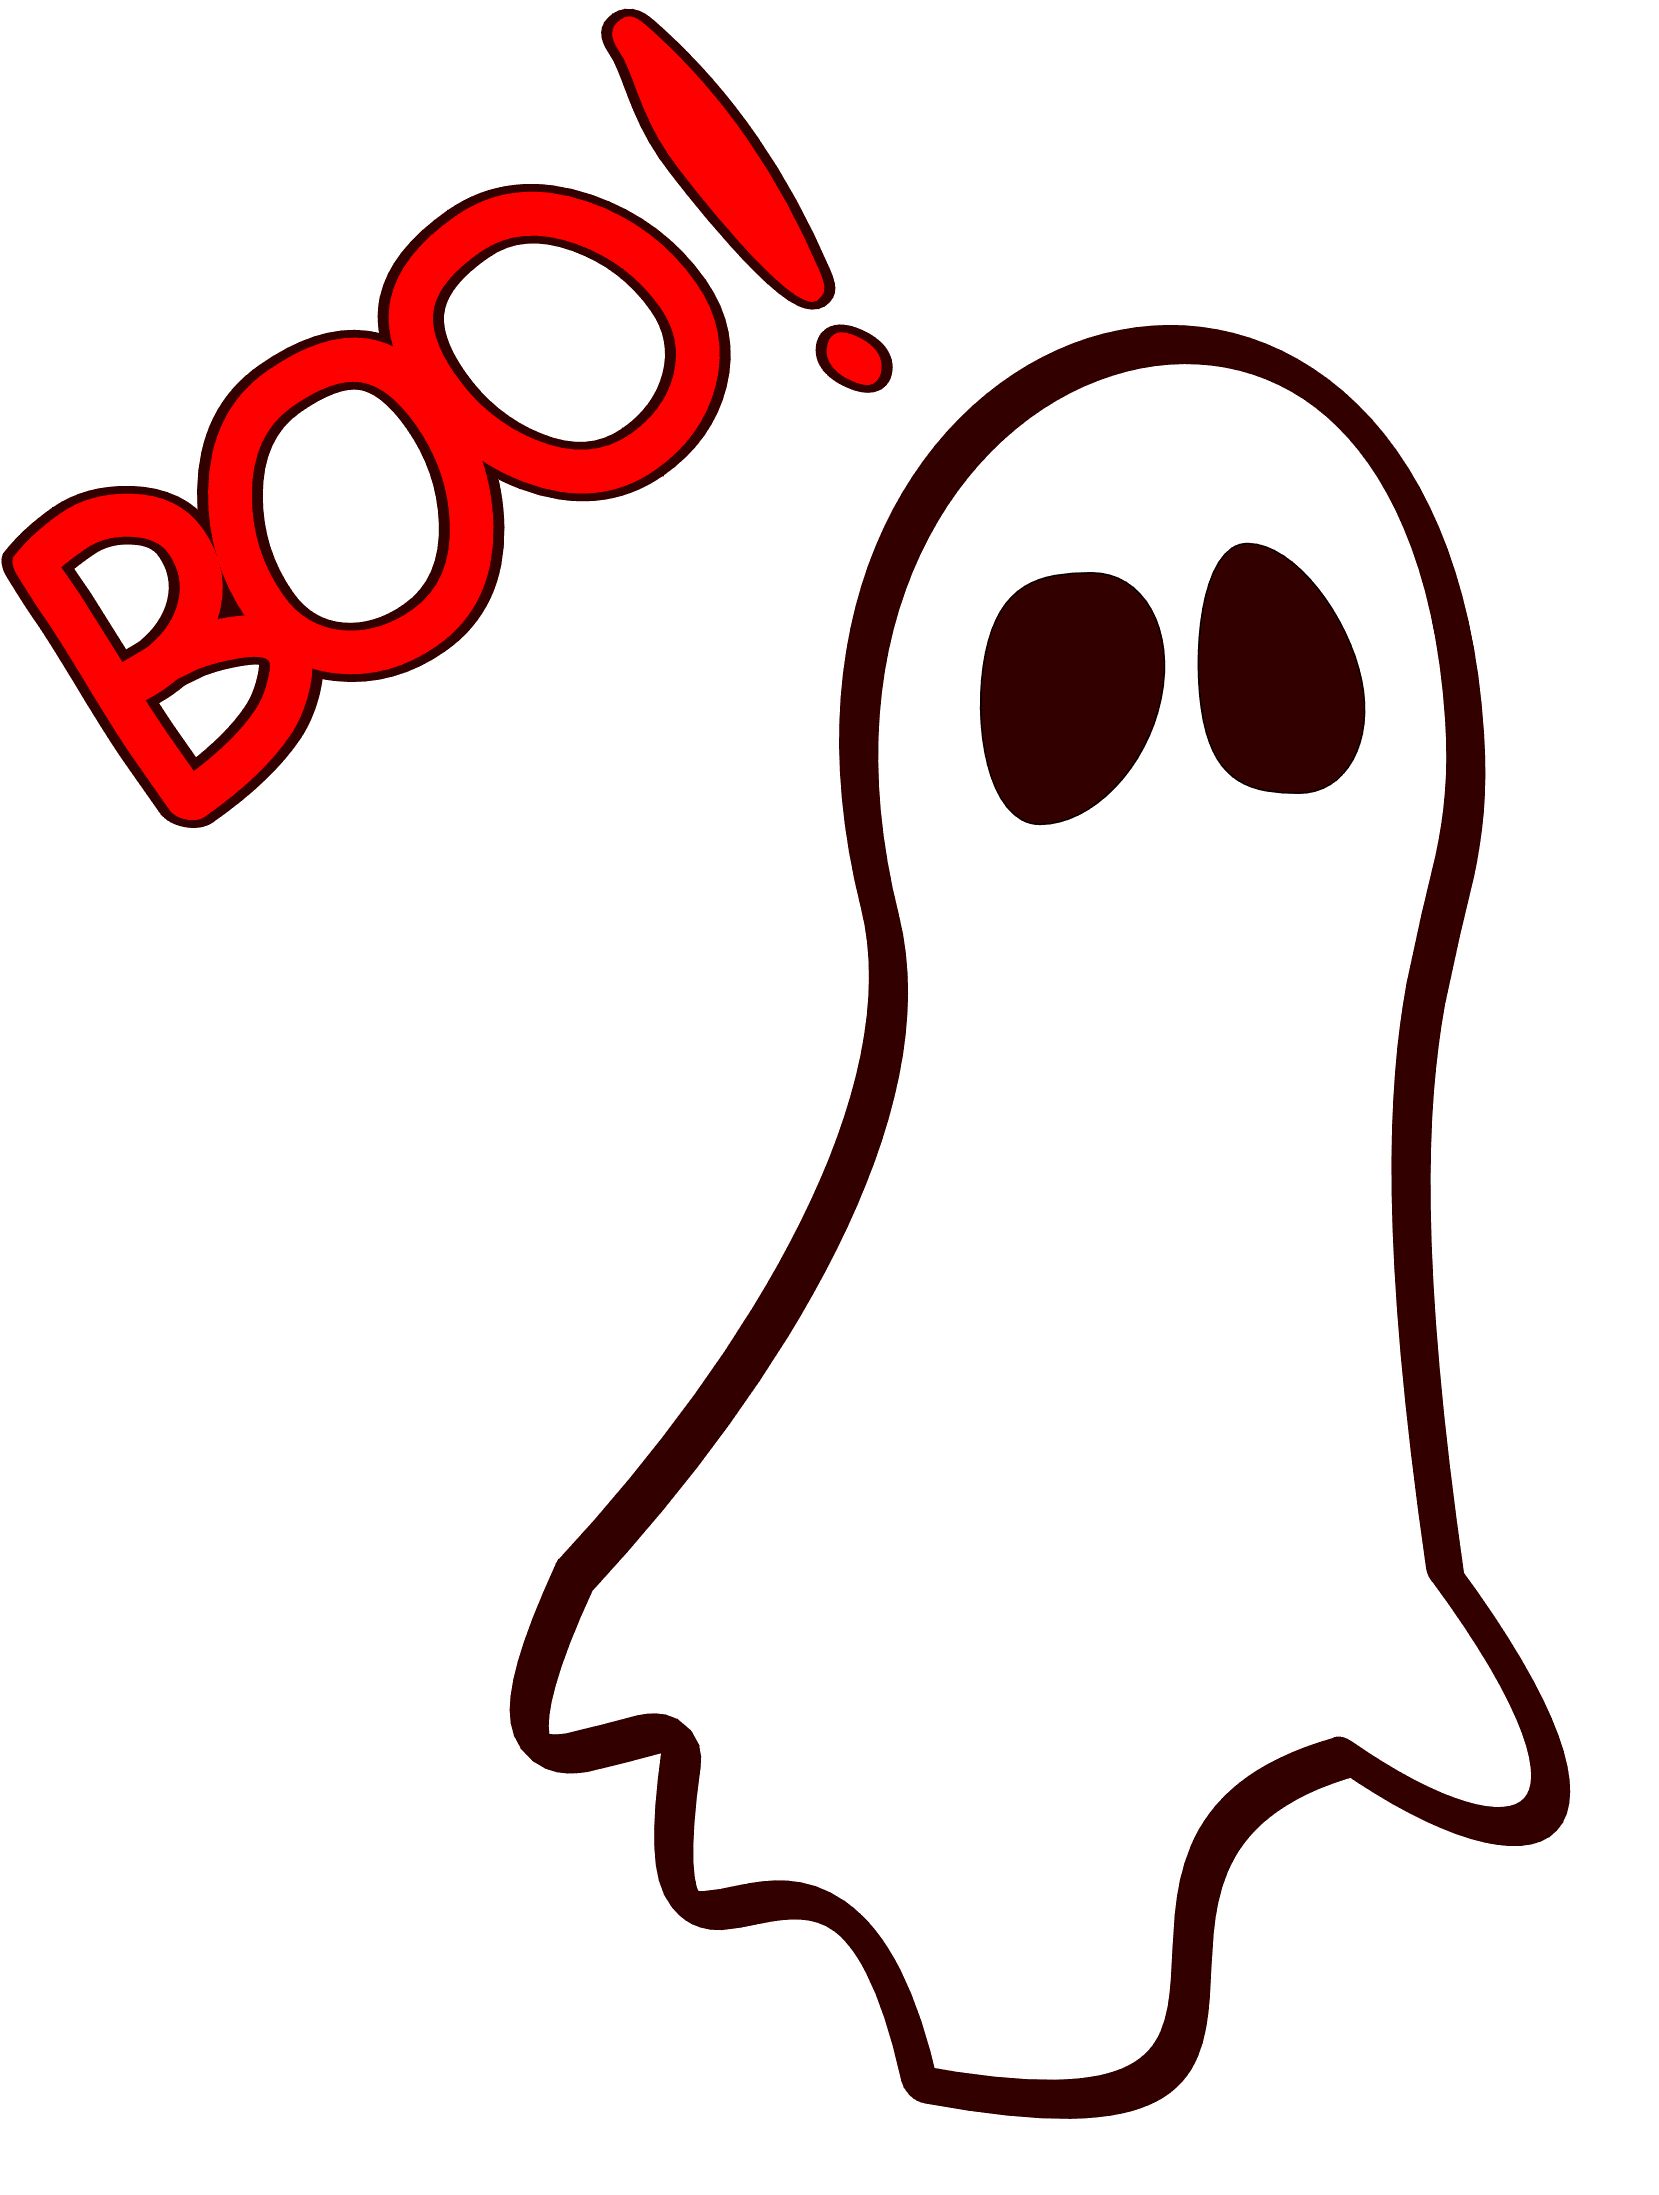 ghostly-clipart-friendly-ghost-619510-7267991